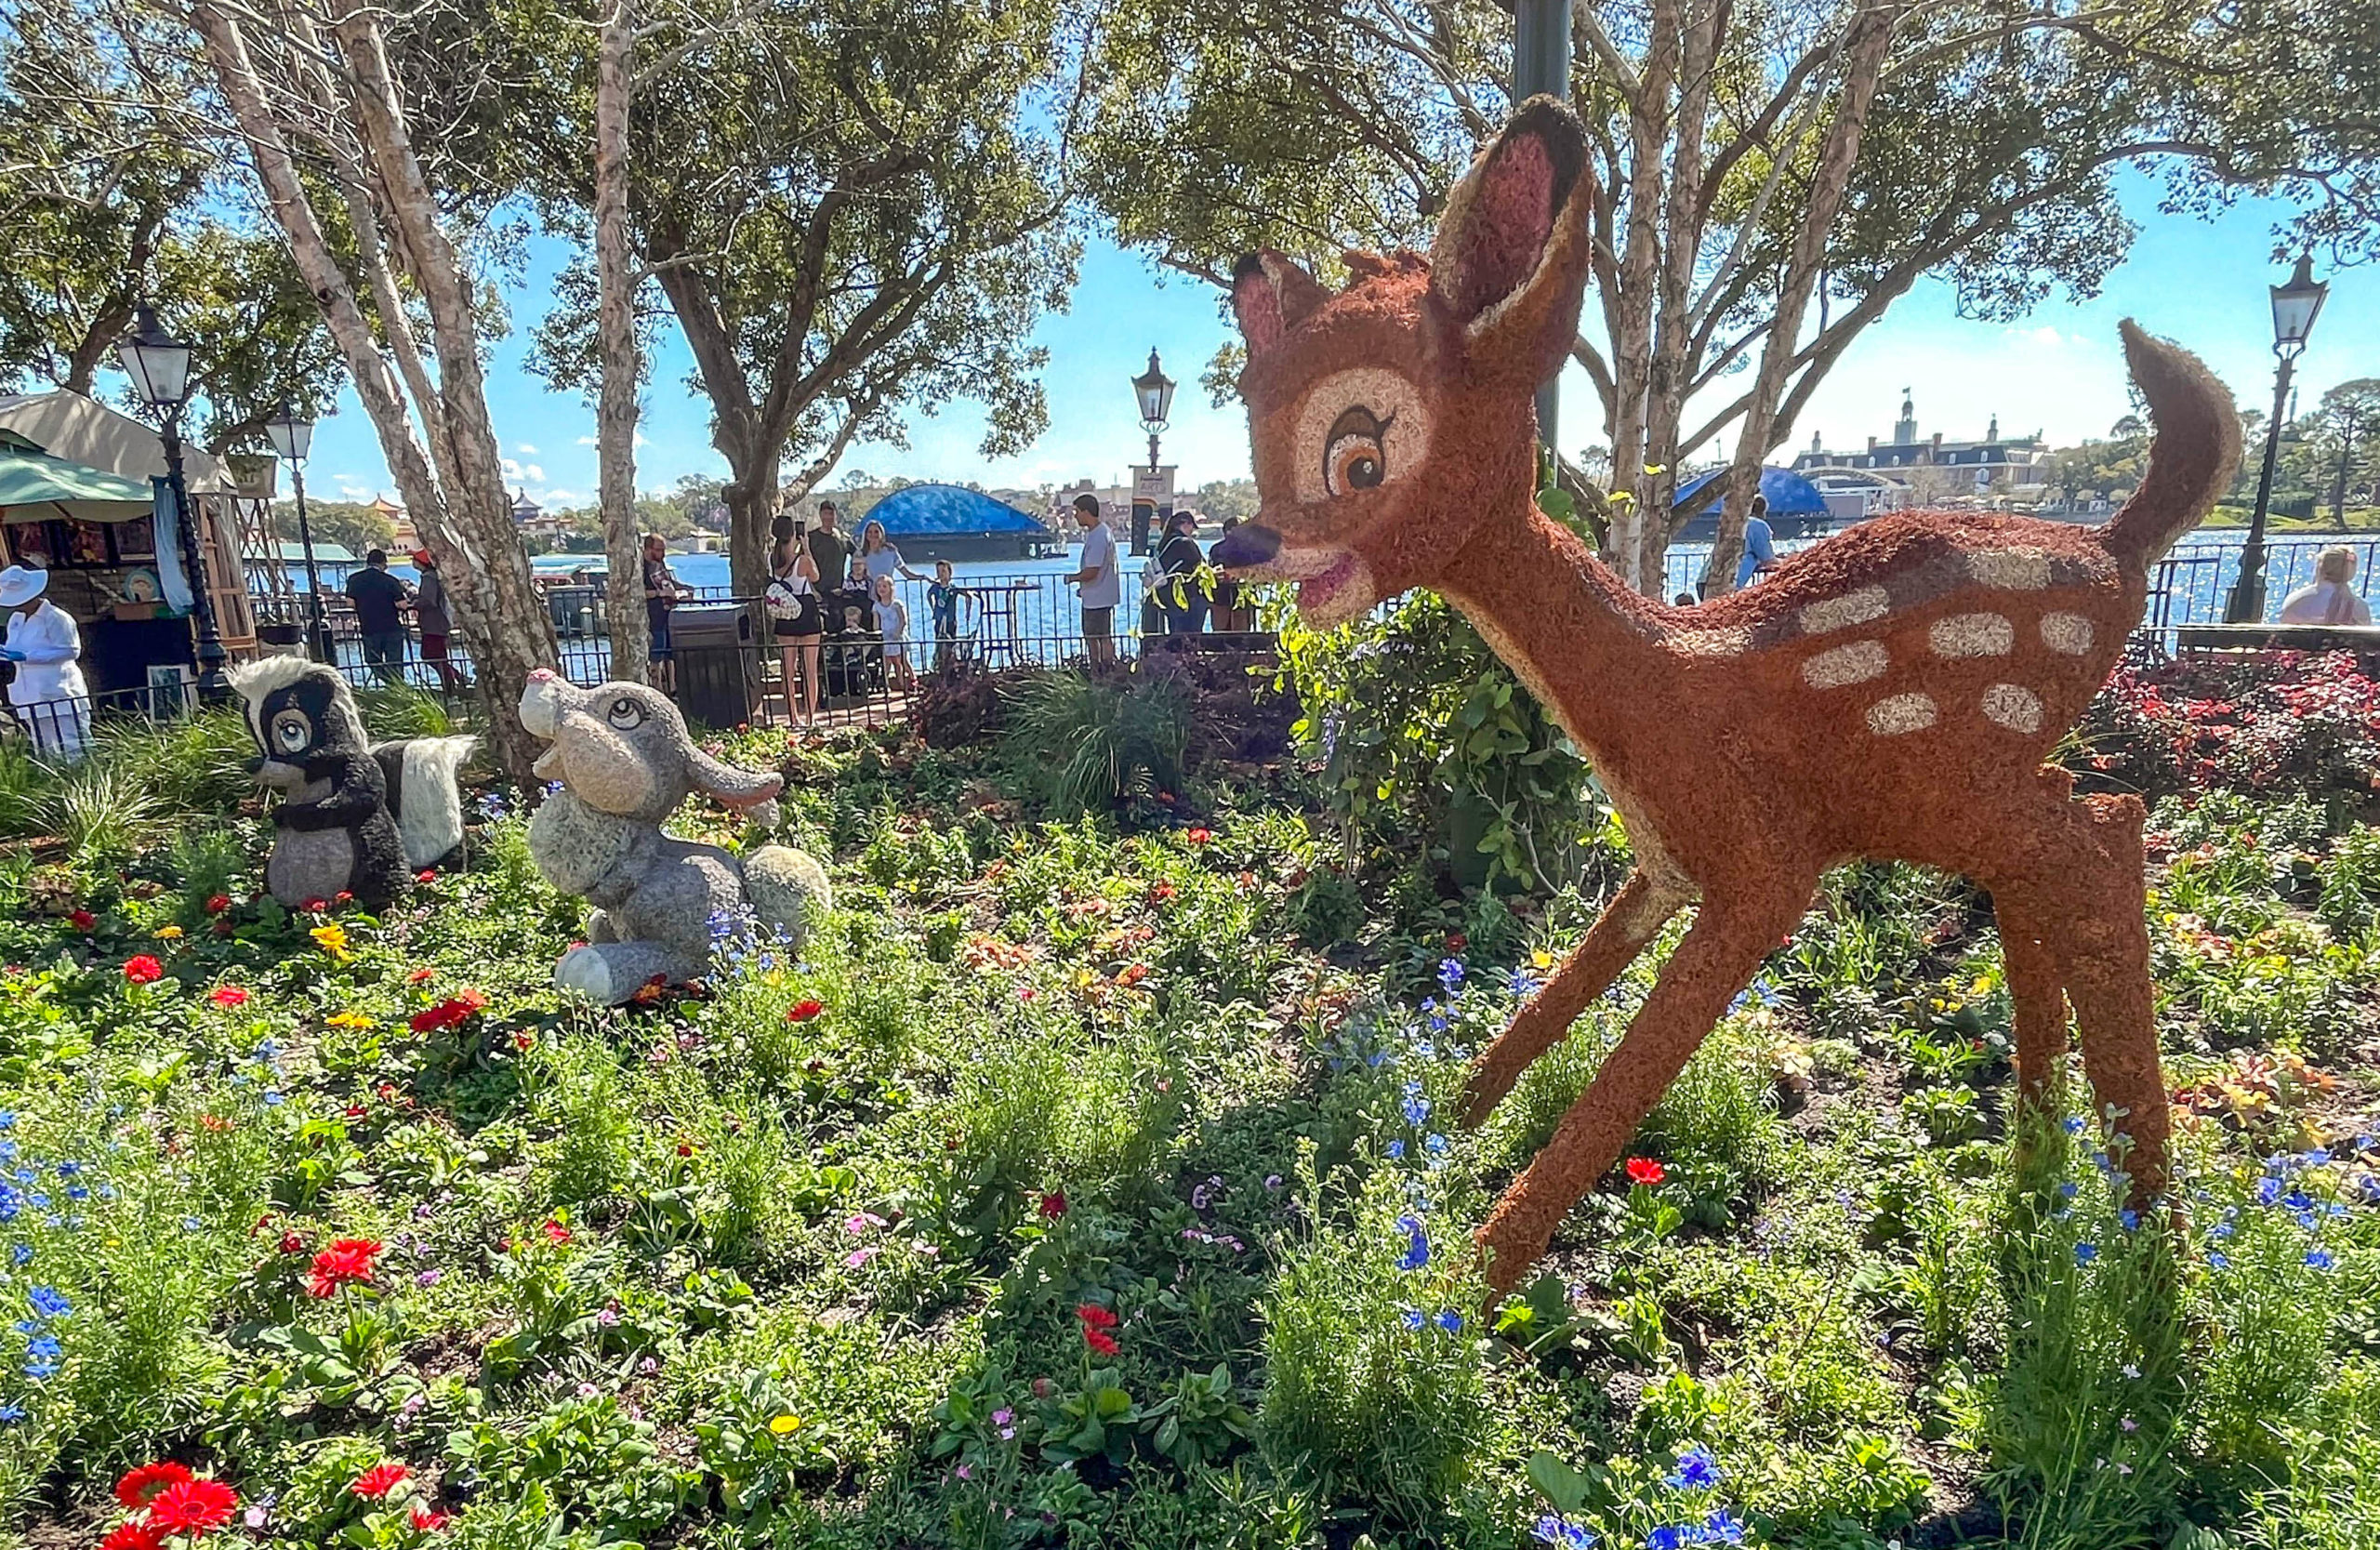 Bambi, Thumper, and Flower Topiaries